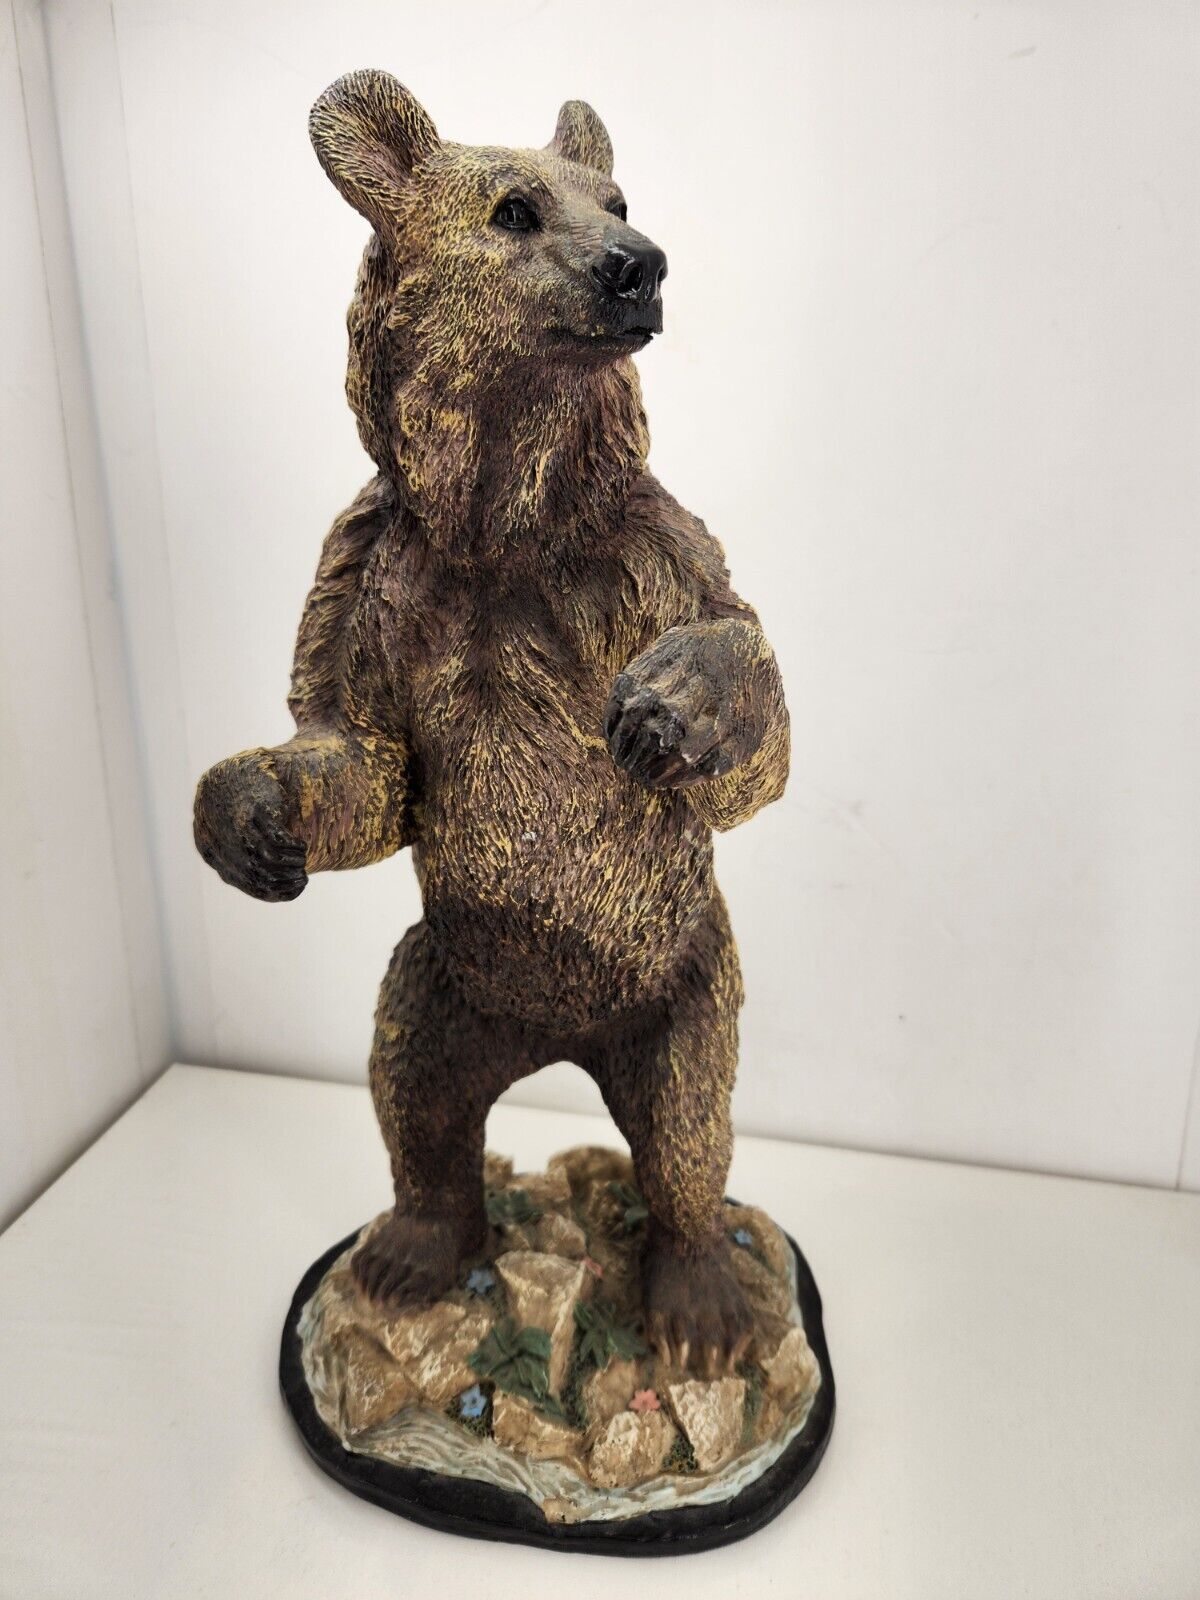 Vintage 16 Inch Tall Resin Grizzly Bear ELY 1994 Rare Statue Sculpture Artist